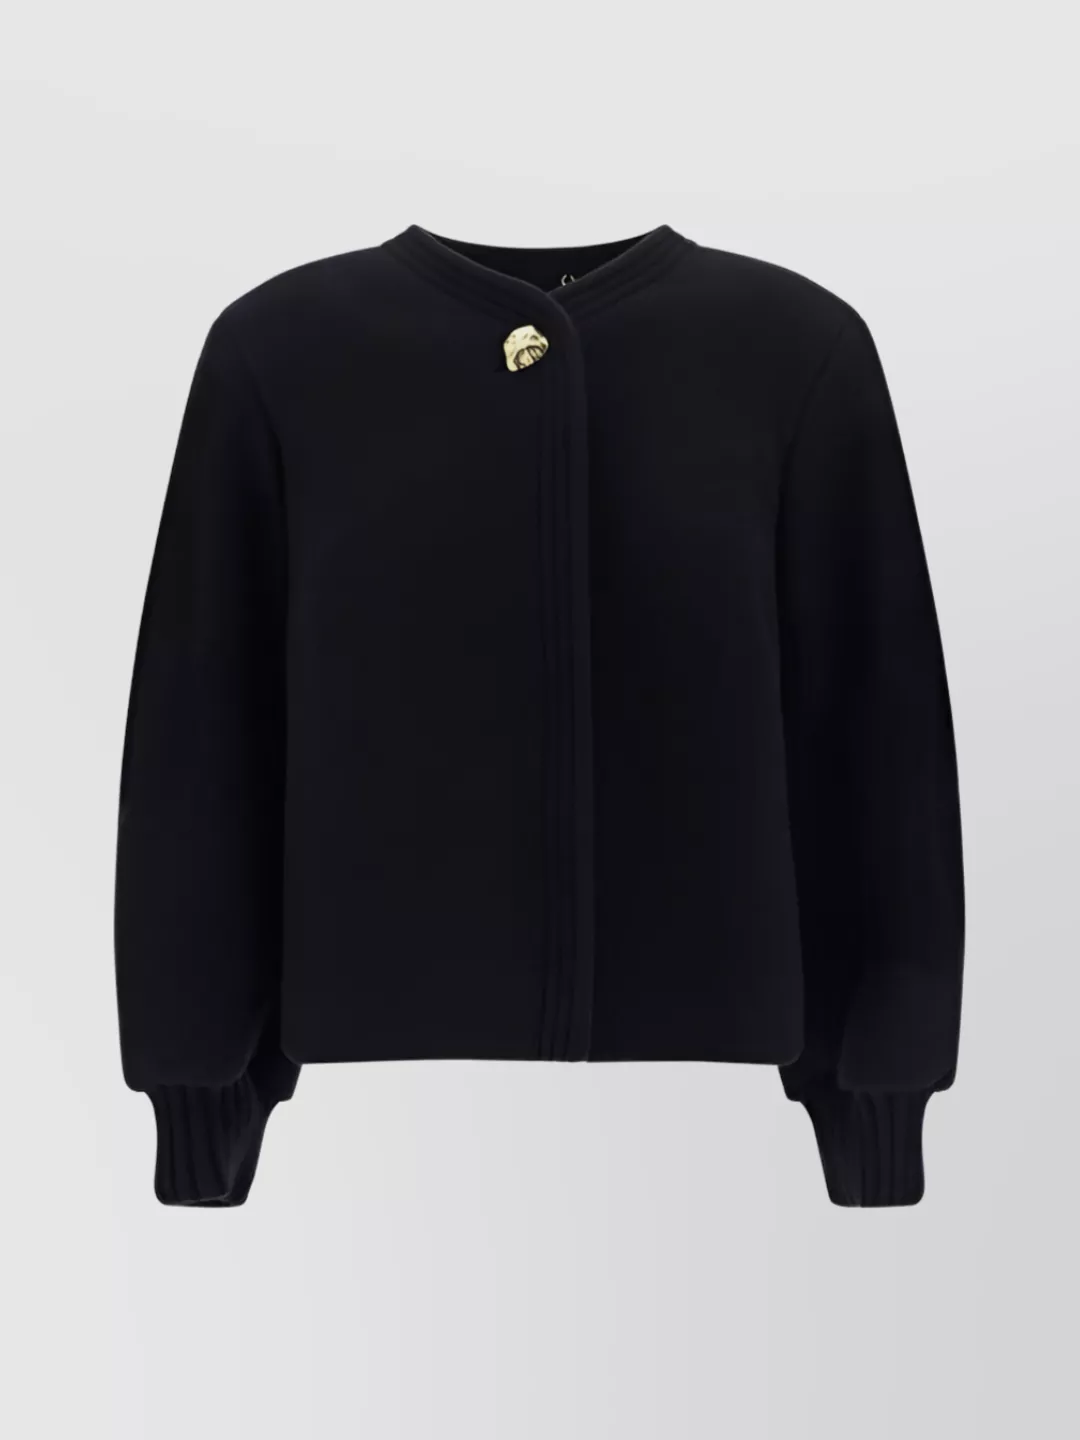 Chloé Wool Crew Neck Jacket With Embellished Detail In Black